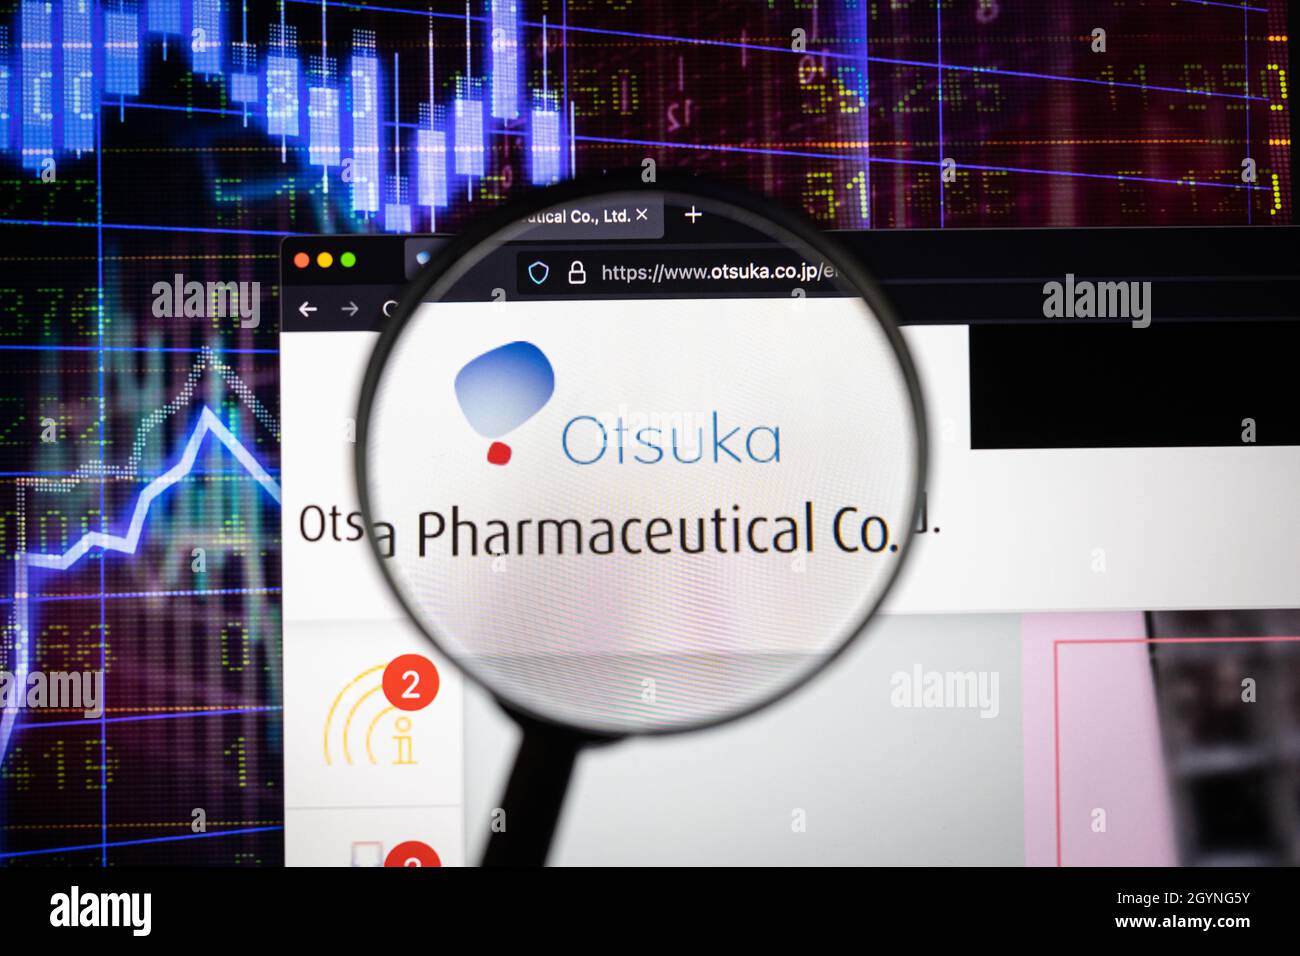 Otsuka company logo on a website with blurry stock market developments in the background, seen on a computer screen through a magnifying glass Stock Photo